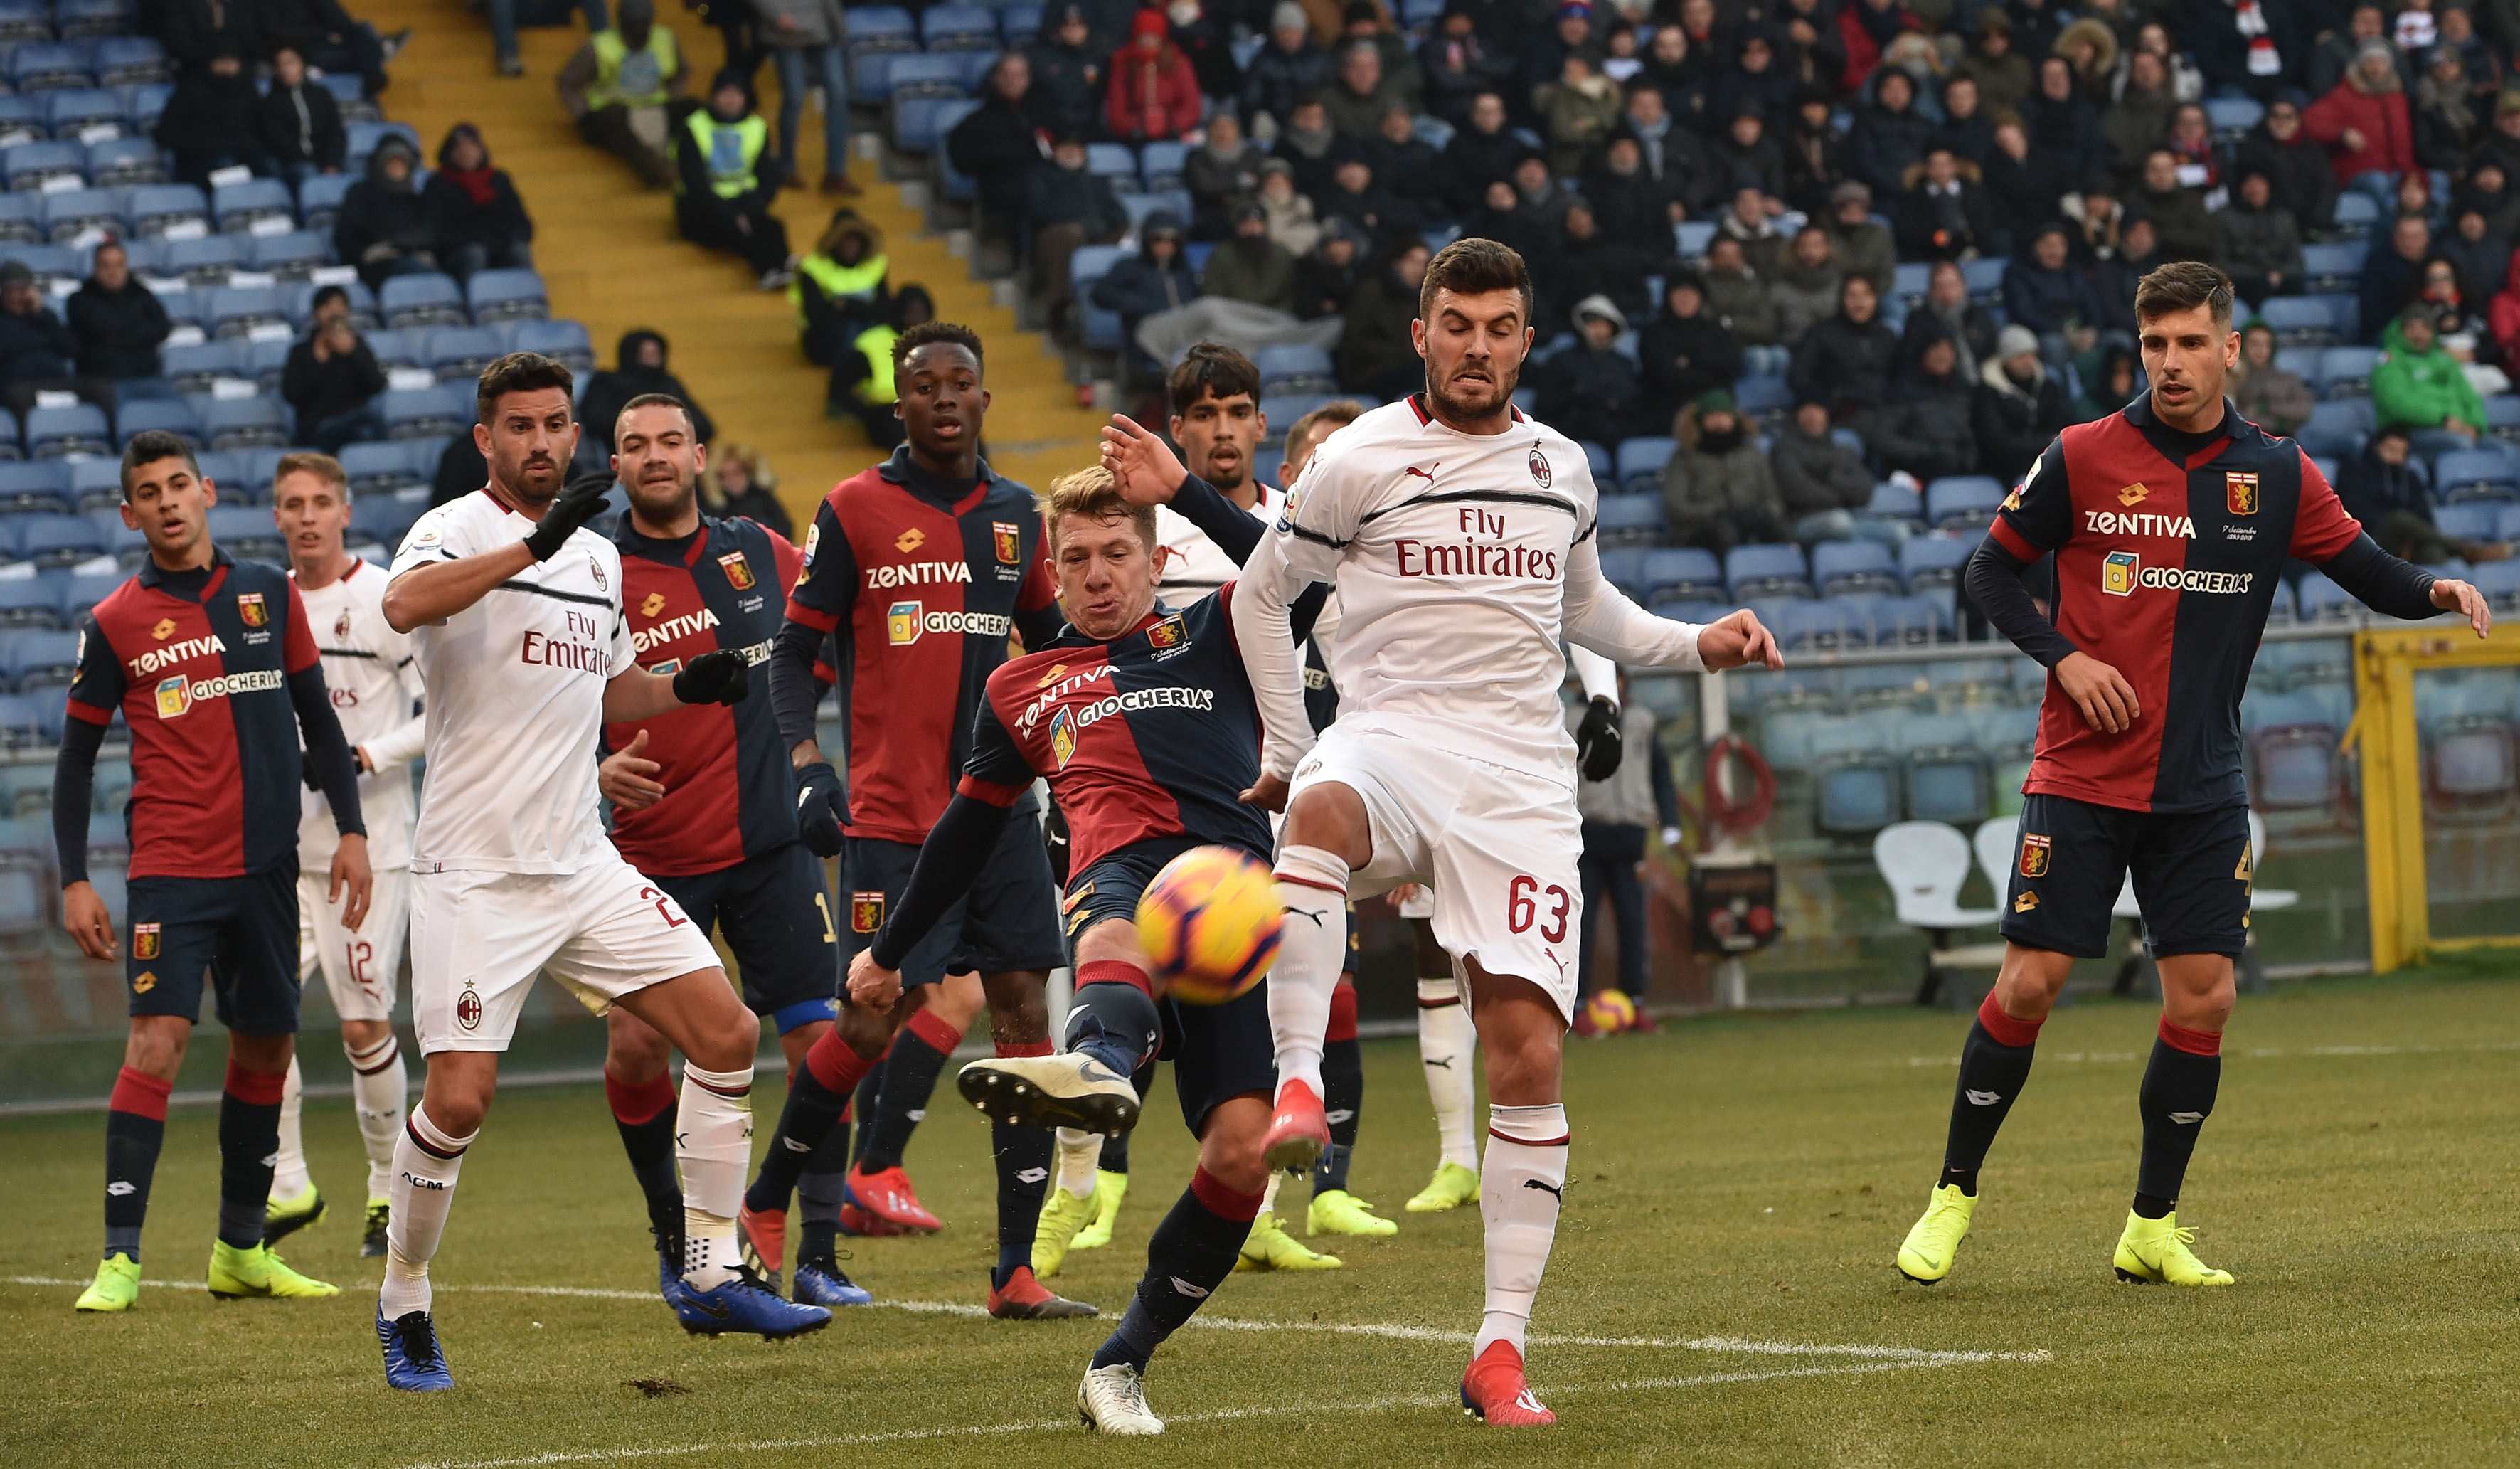 GENOA, ITALY - JANUARY 21: Patrick Cutrone of Milan and Esteban Rolon of Genoa battle for the ball during the Serie A match between Genoa CFC and AC Milan at Stadio Luigi Ferraris on January 21, 2019 in Genoa, Italy. (Photo by Paolo Rattini/Getty Images)